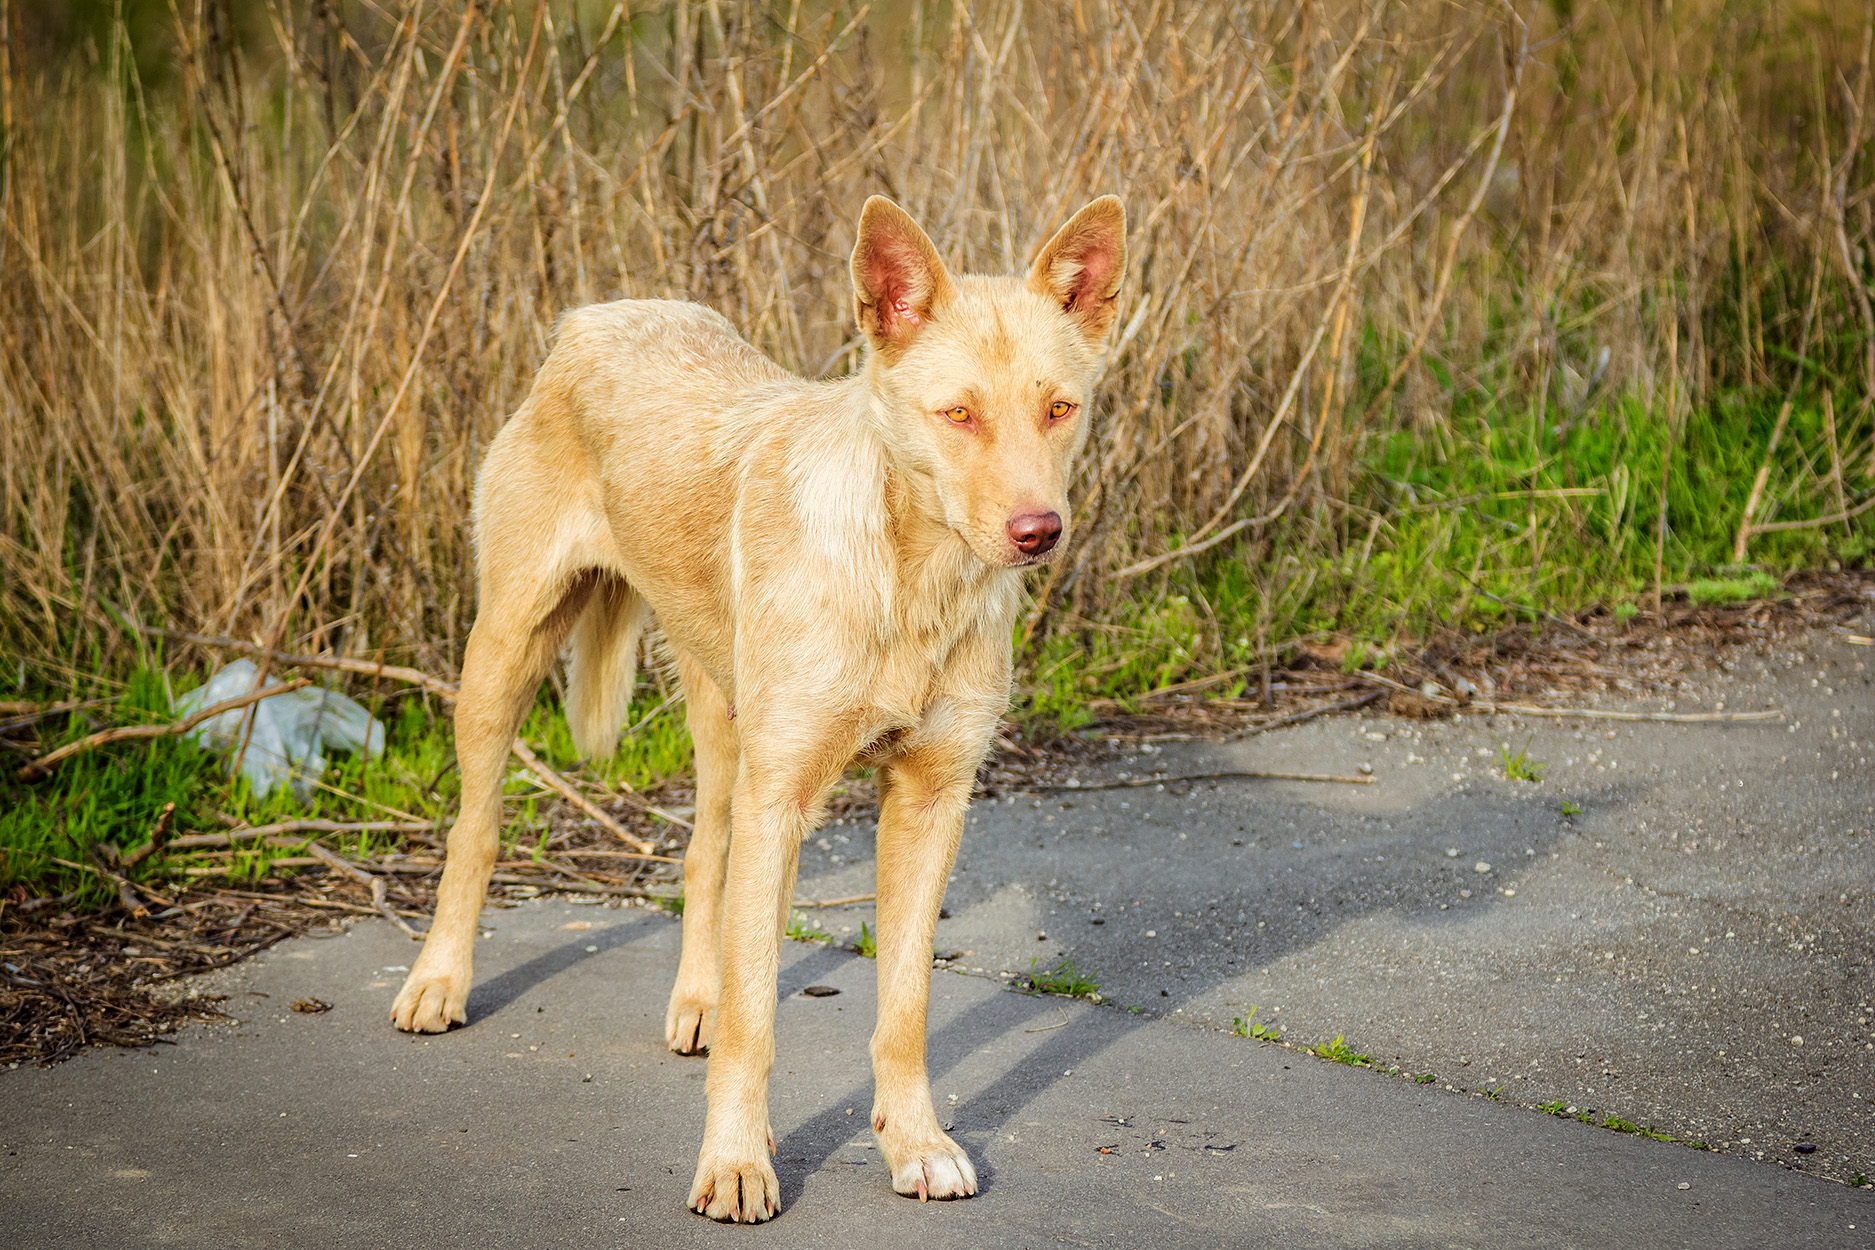 A feral dog stands on the roadside.